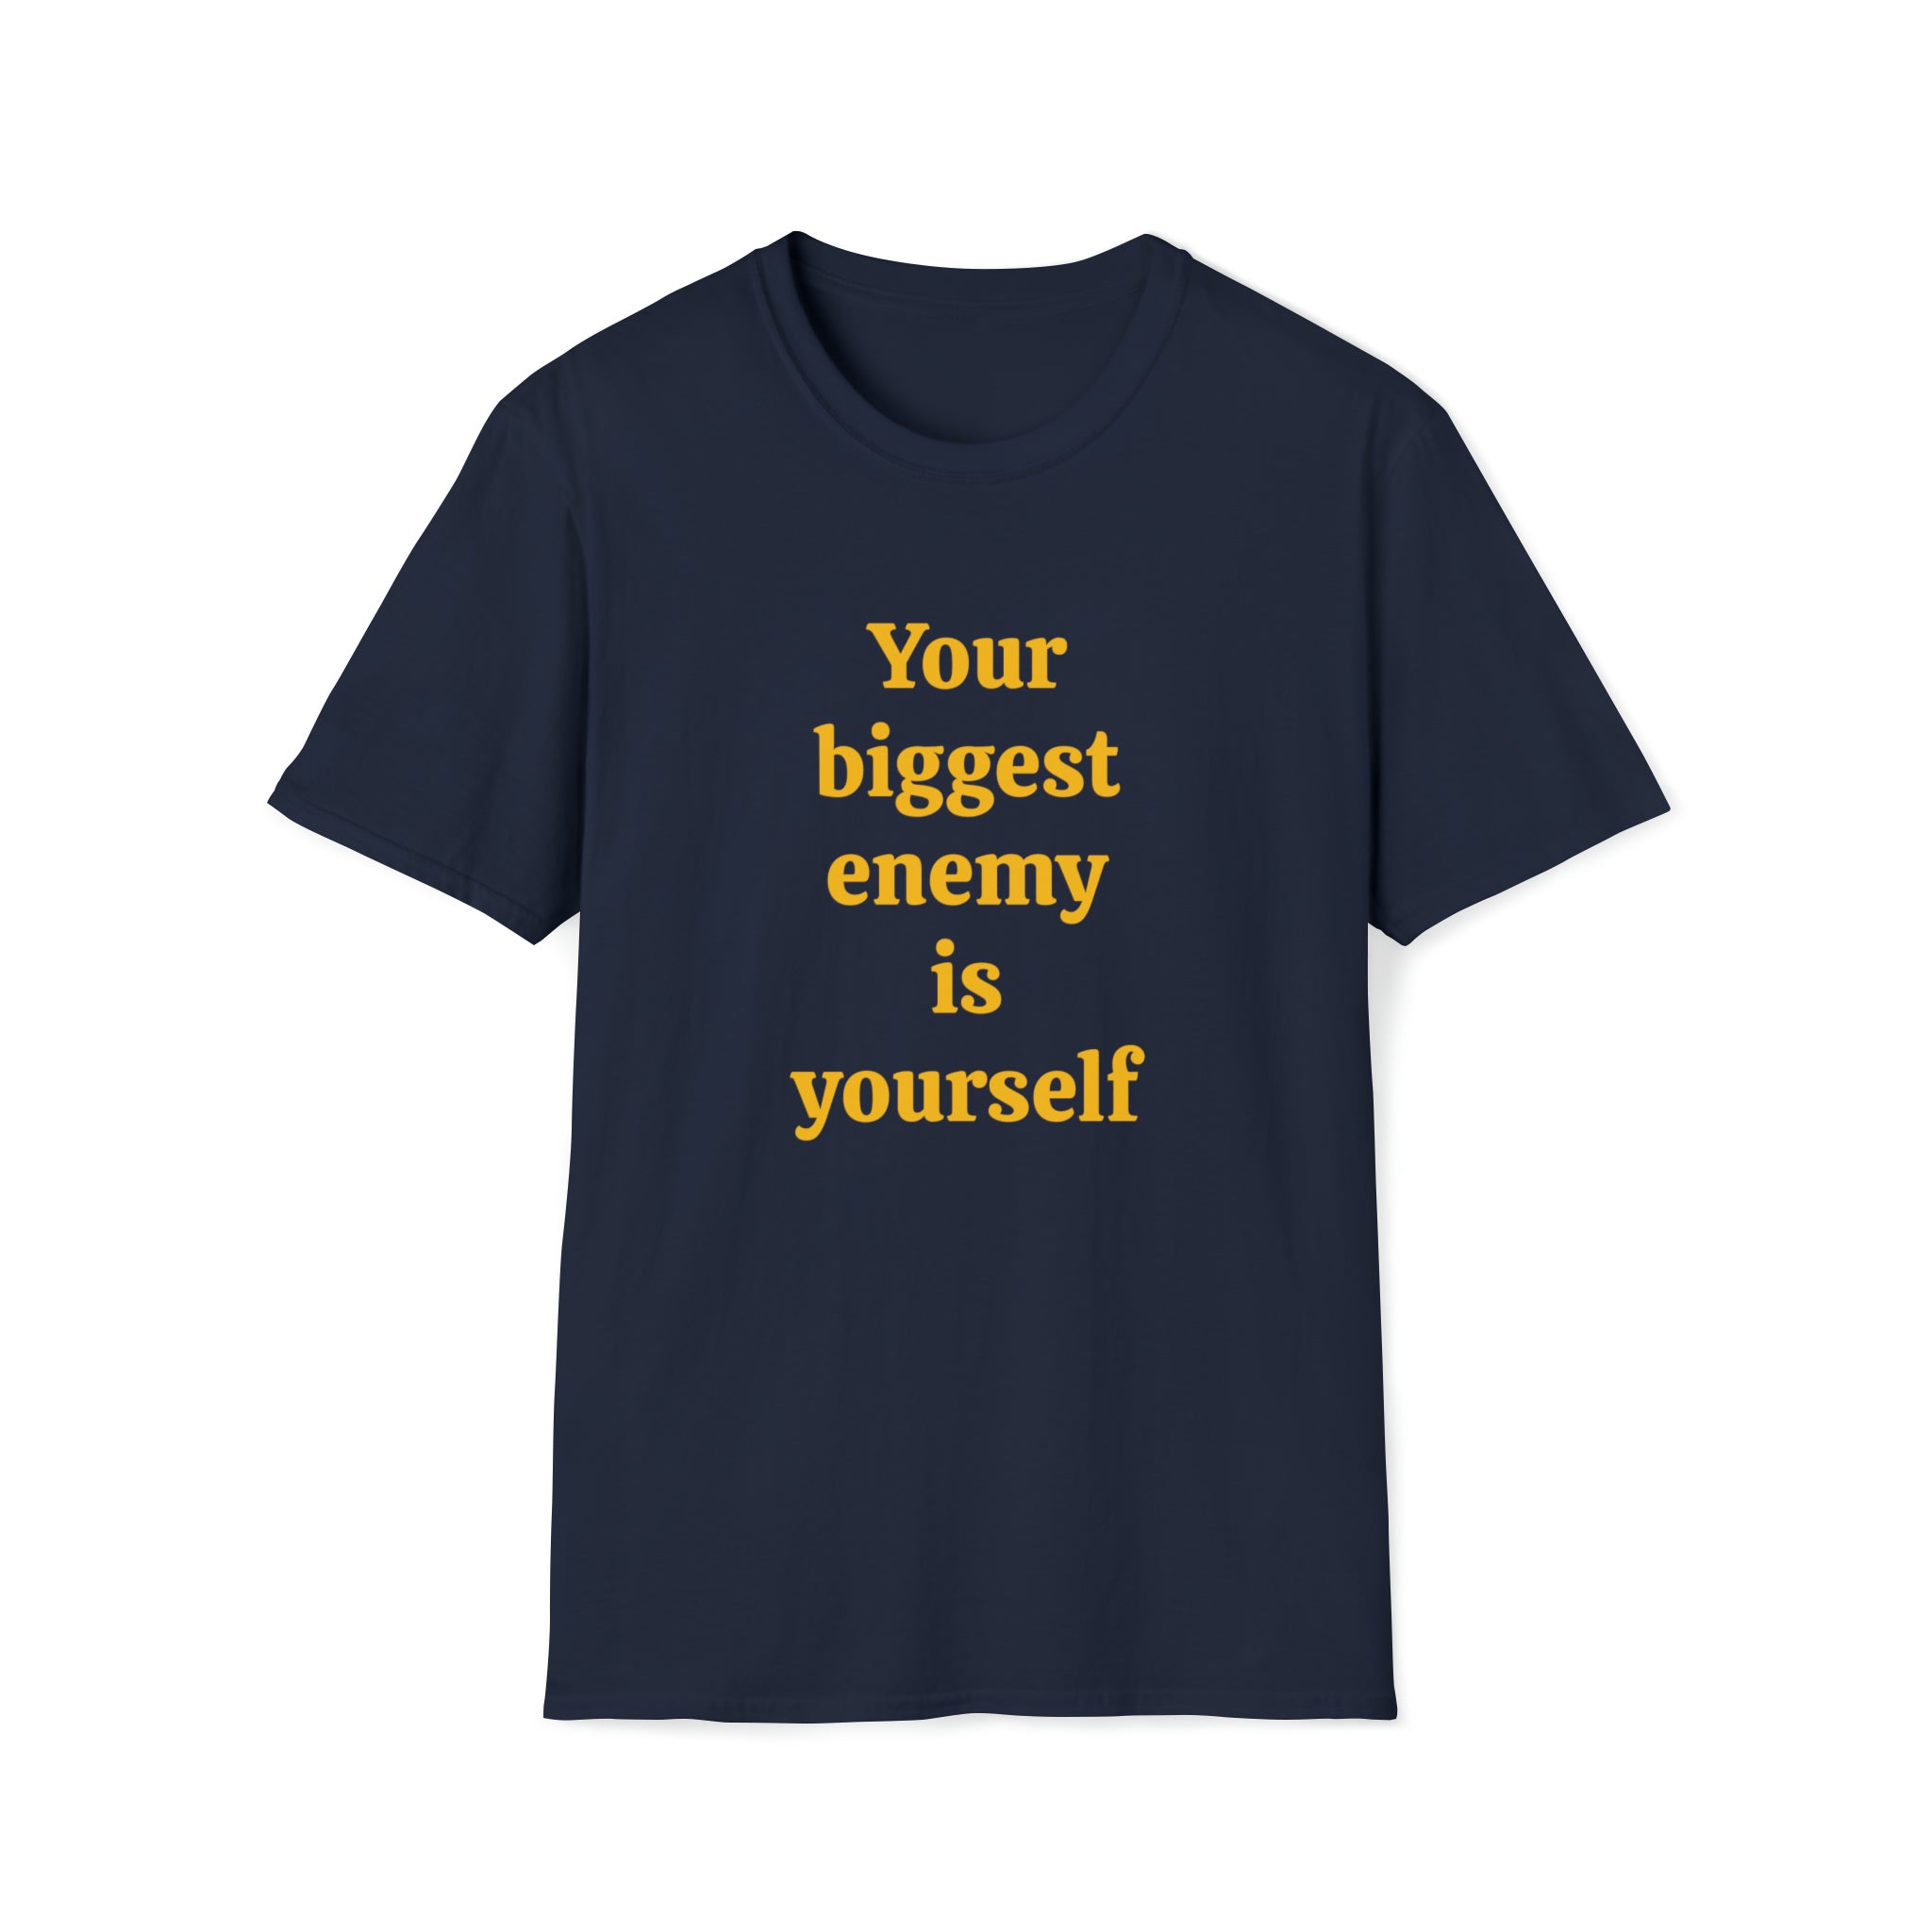 Your biggest enemy is yourself T-Shirt